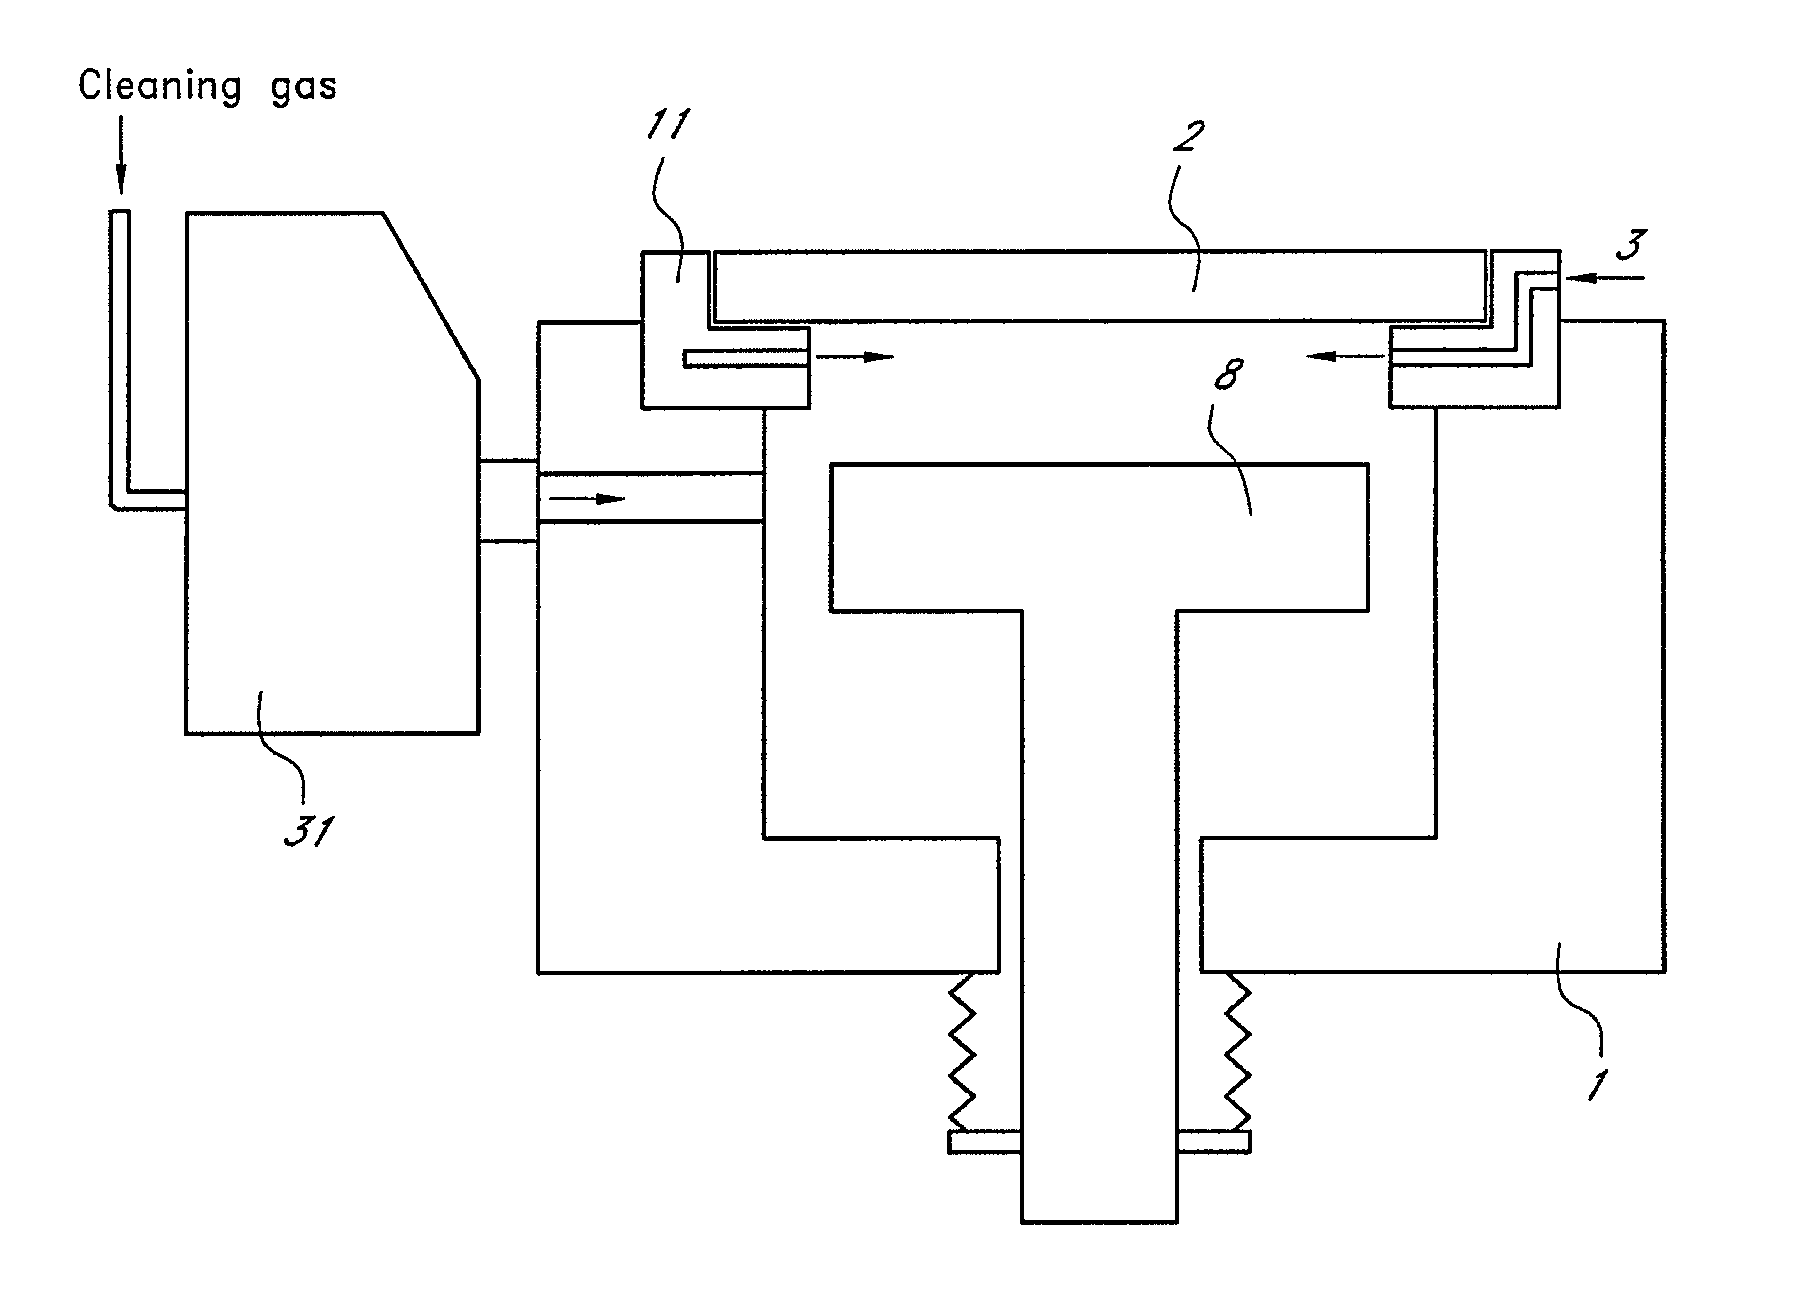 Method of cleaning UV irradiation chamber